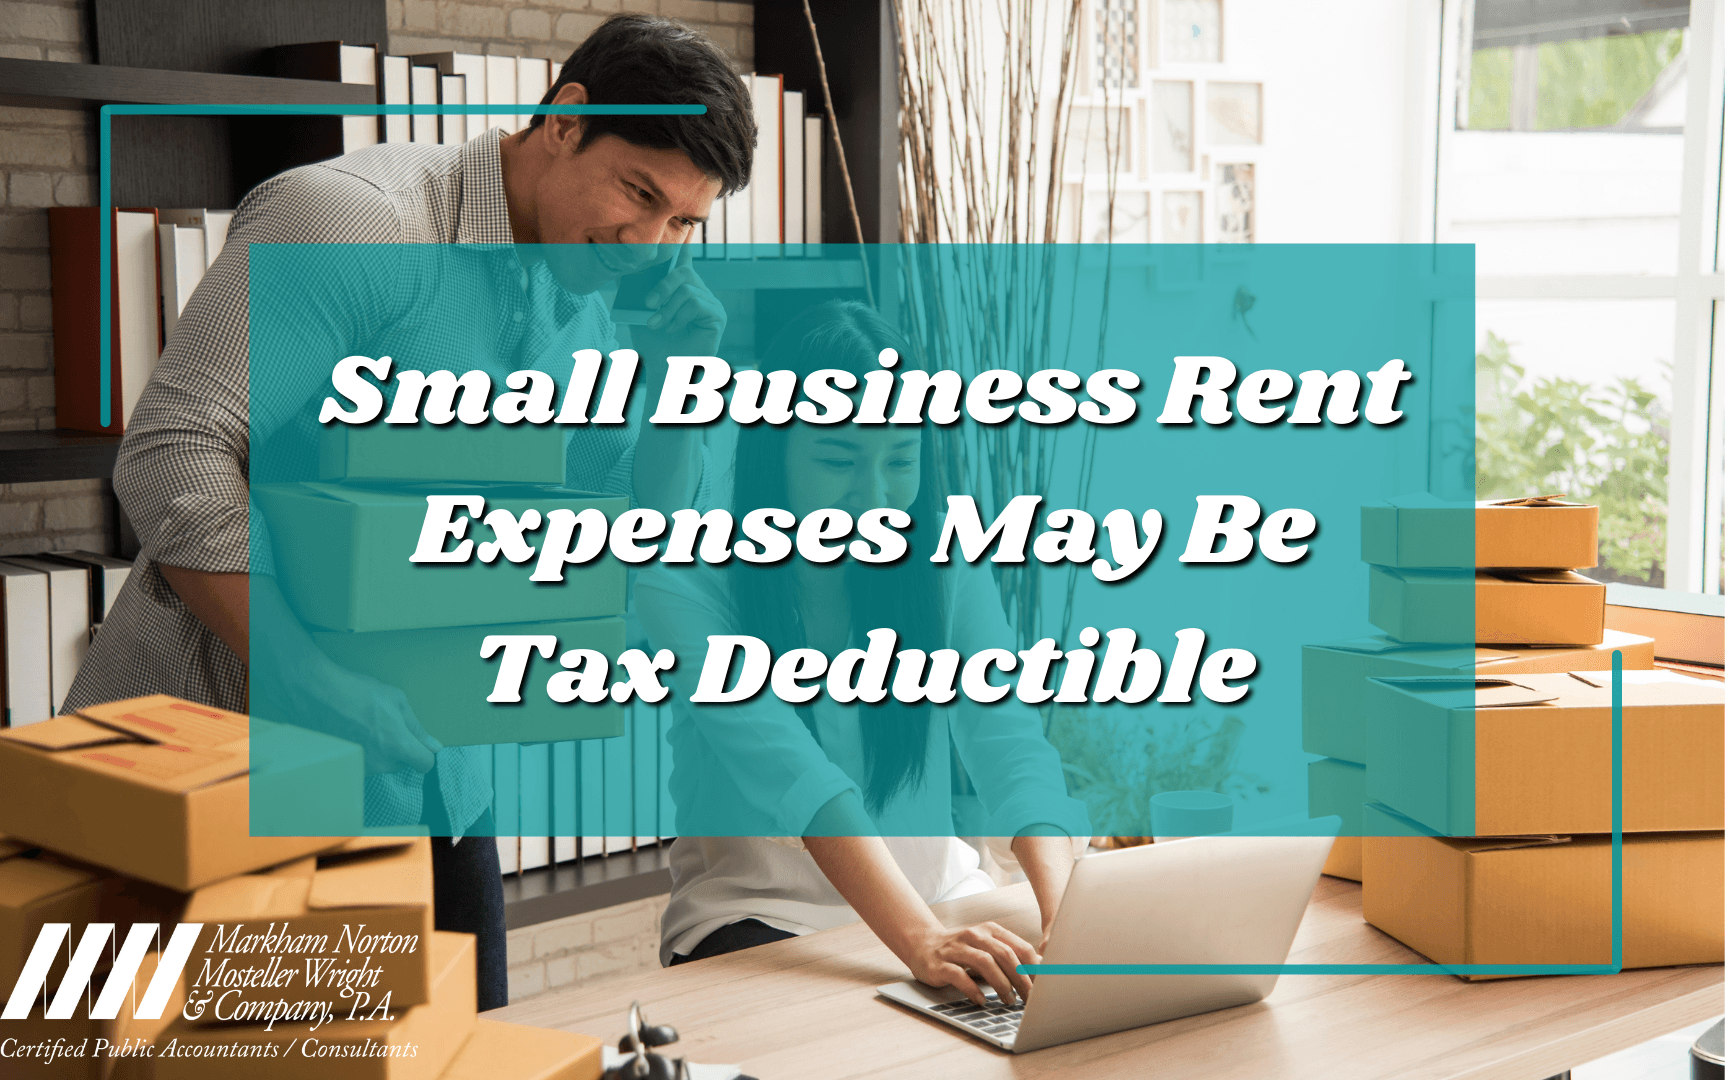 Small Business Rent Blog Post